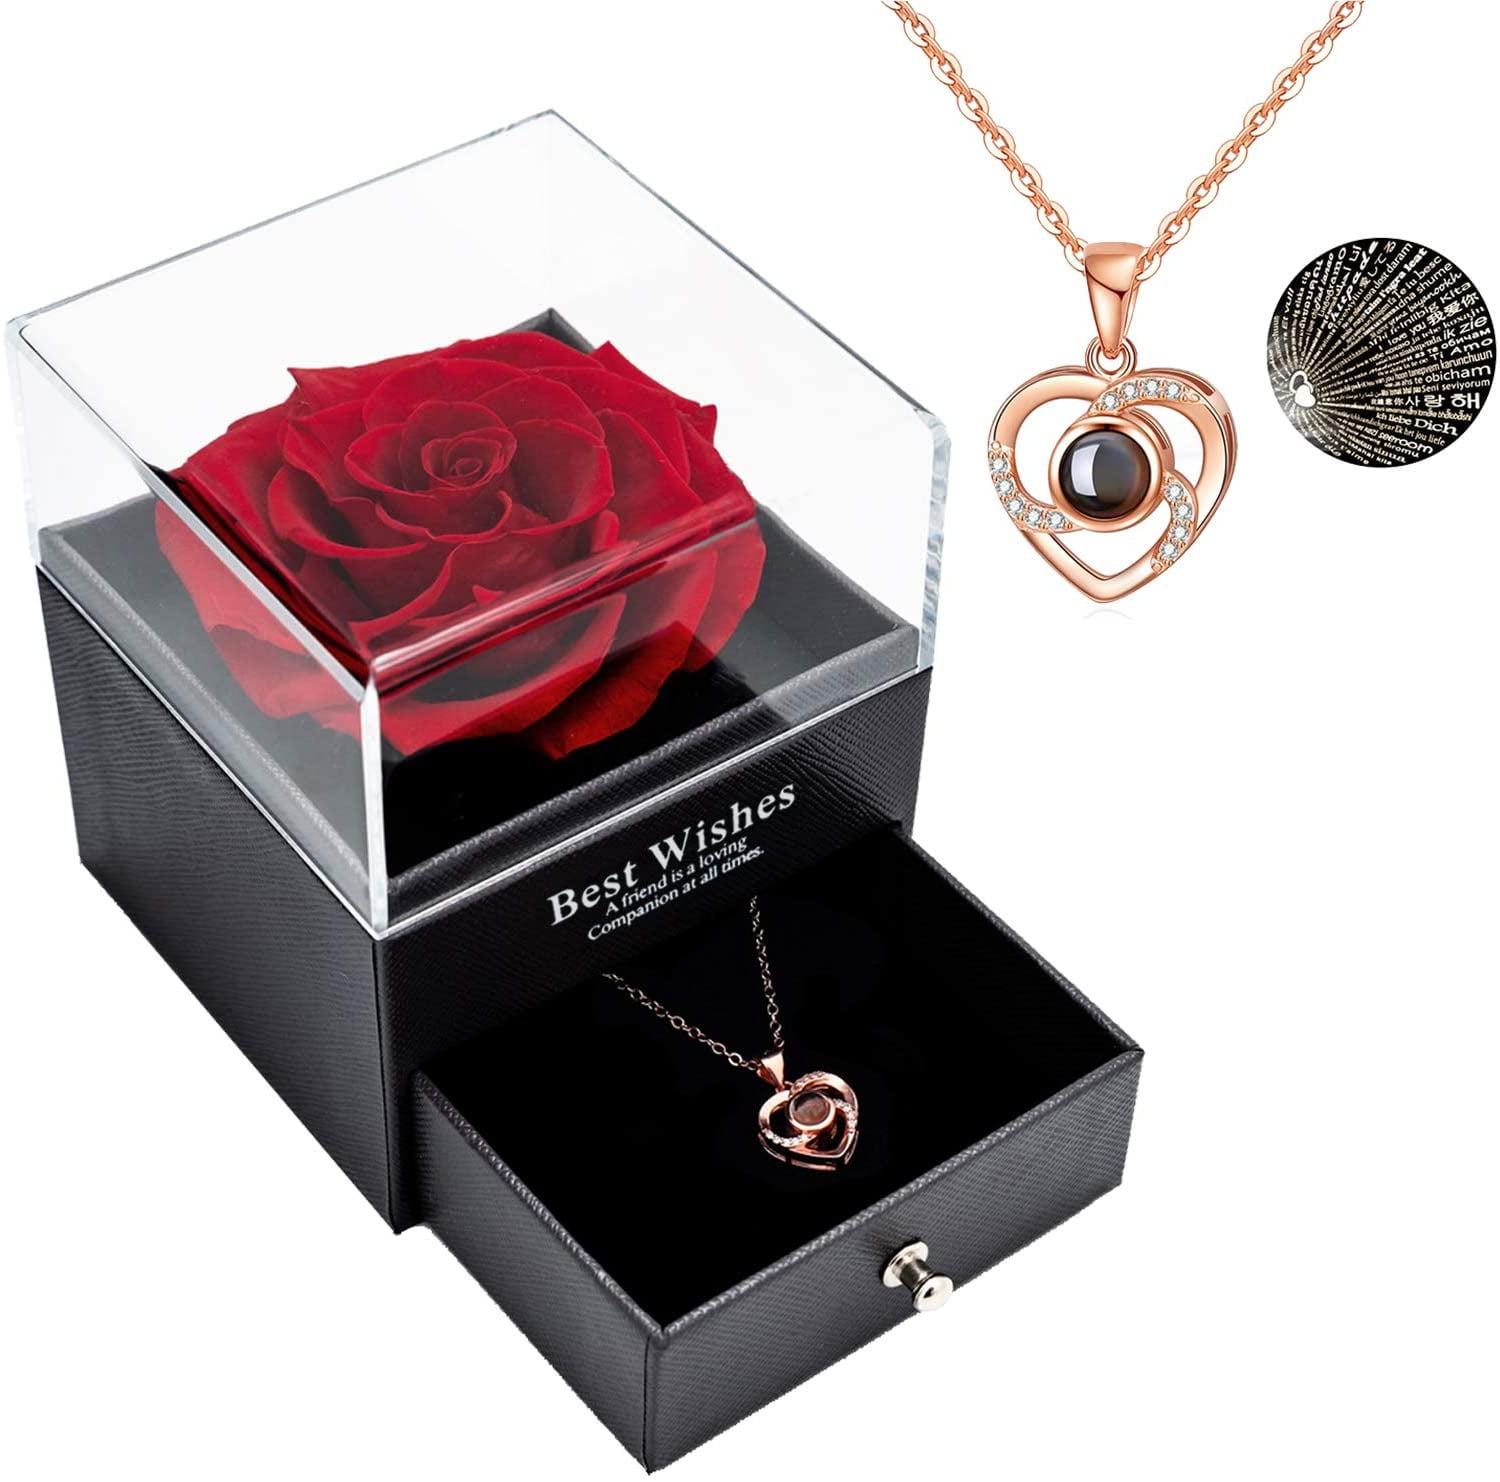 Handmade Preserved Rose Gift Box with Forever Rose and Love You Necklace in 100 Languages Enchanted Flower Gift for Girlfriend Mother Wife on Anniversary Valentine's Day Mother's Day Christmas Day